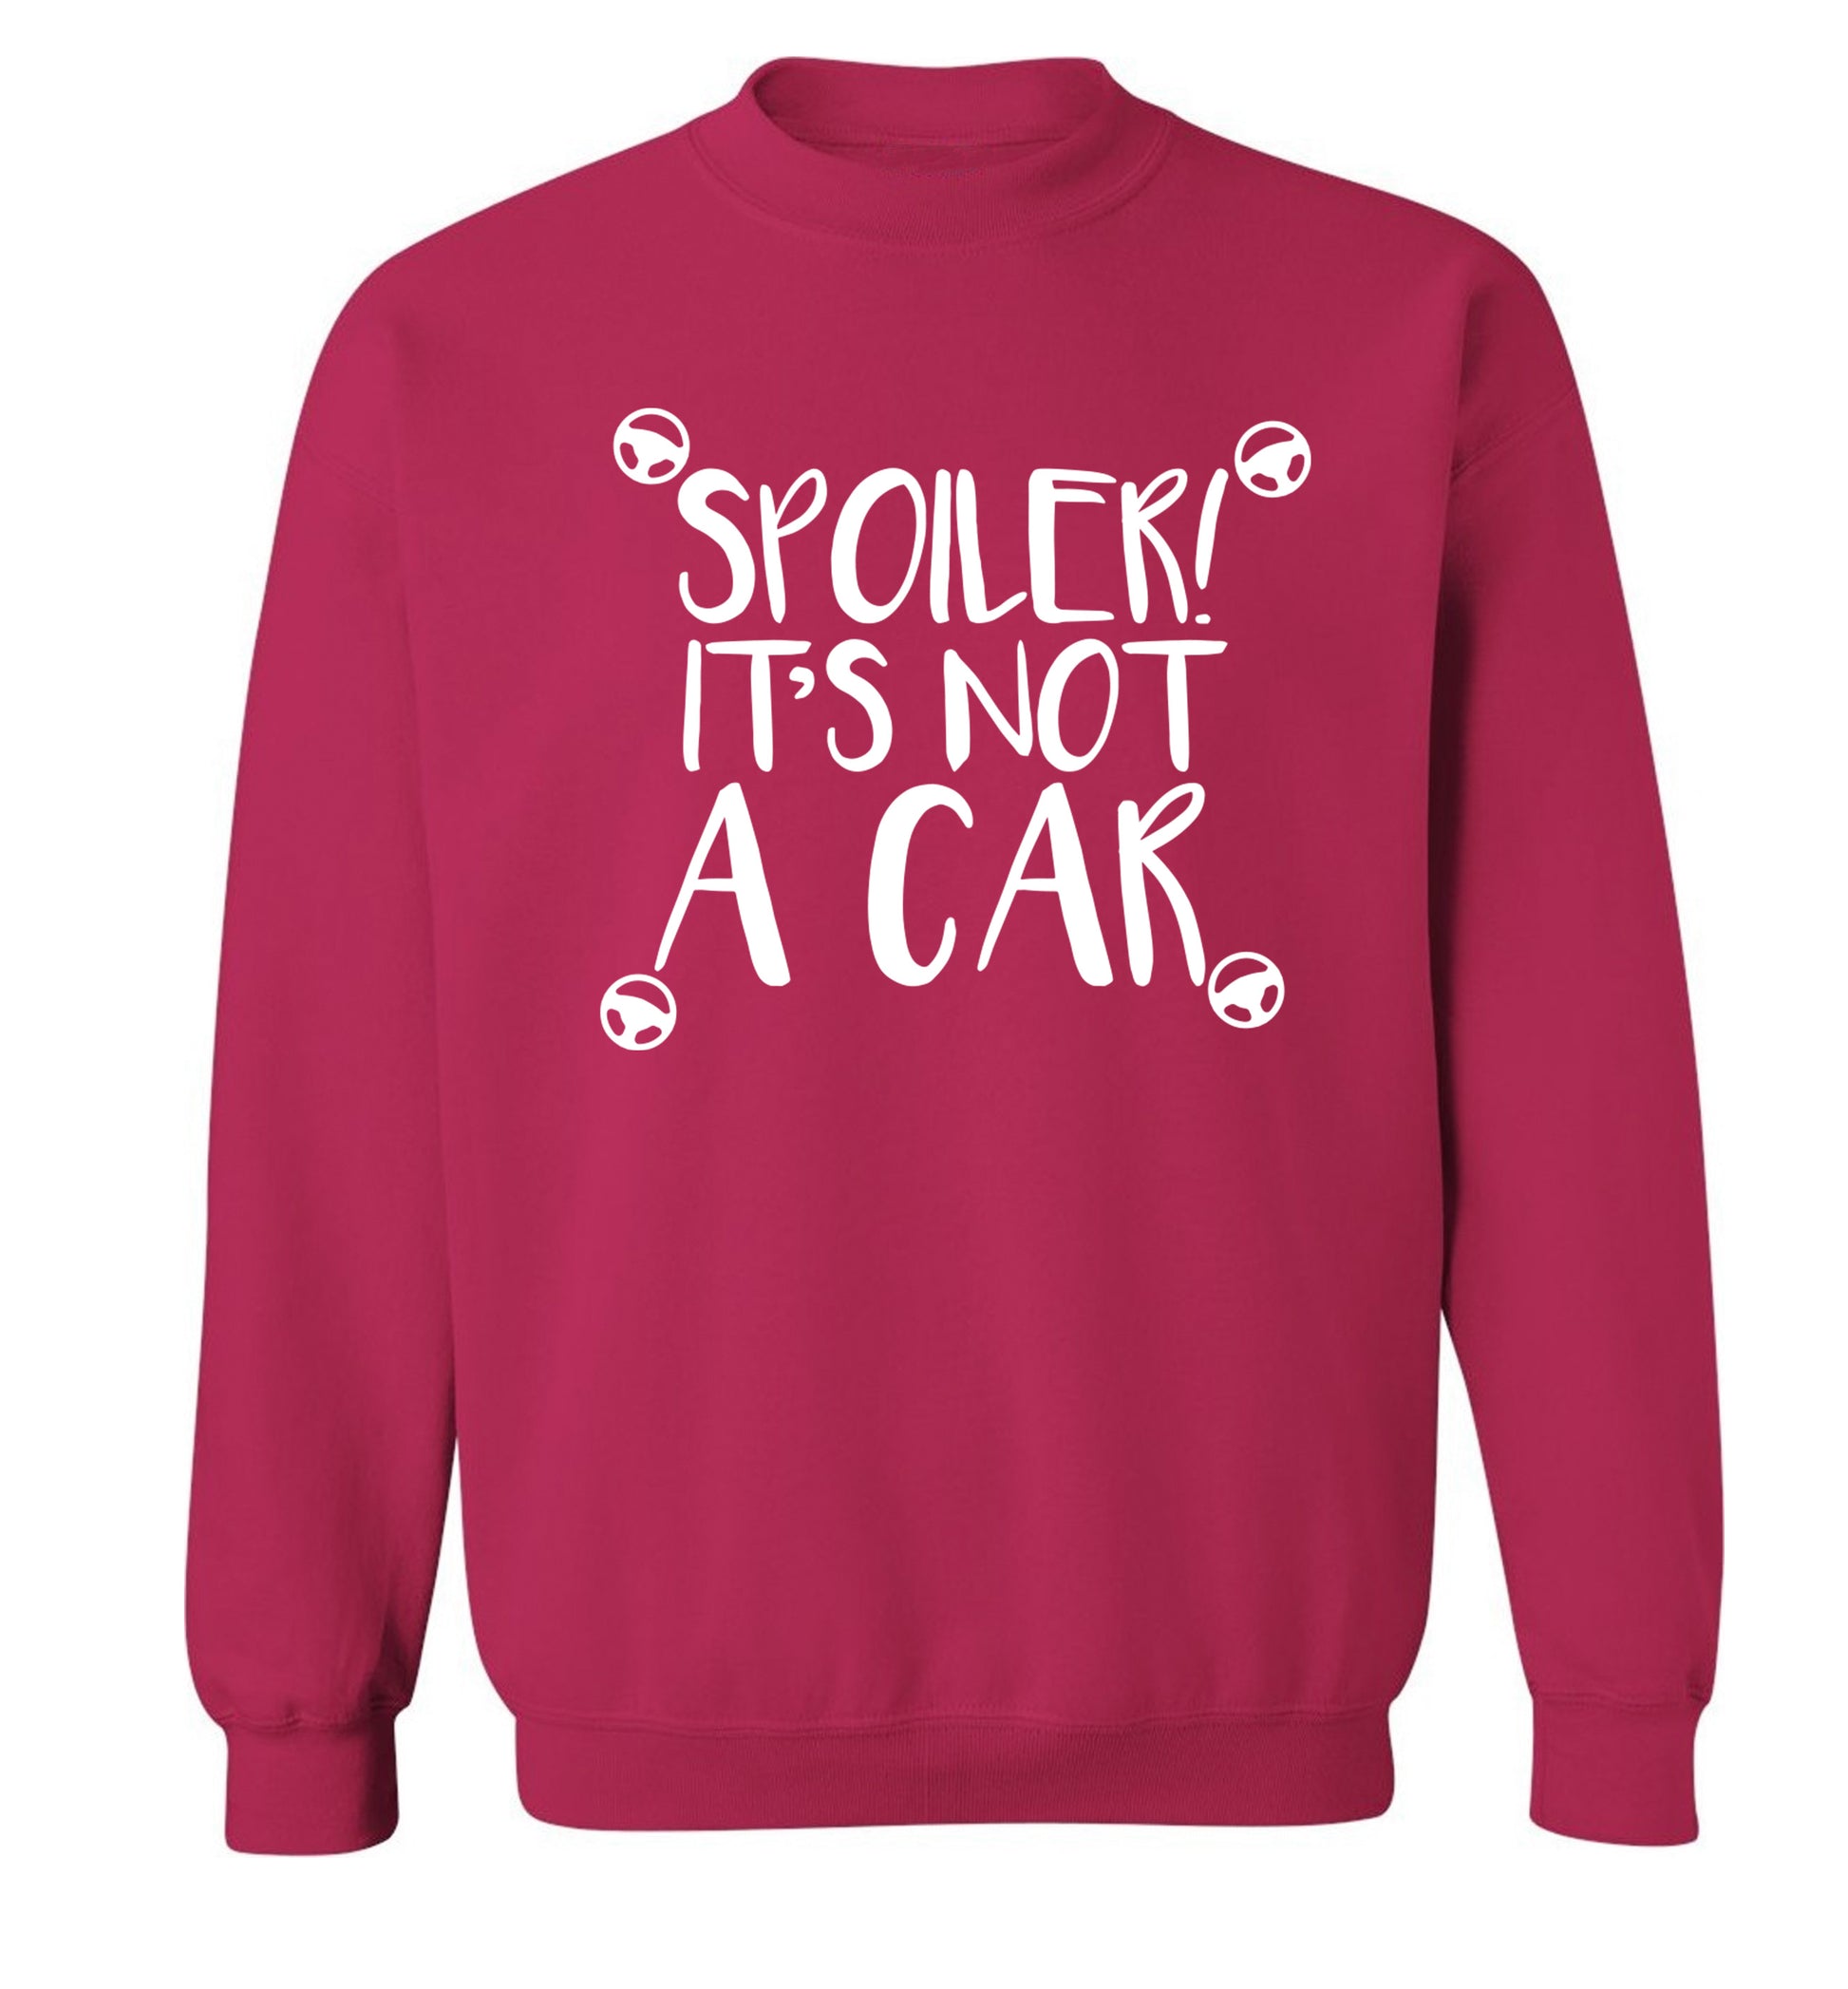 Spoiler it's not a car Adult's unisex pink Sweater 2XL